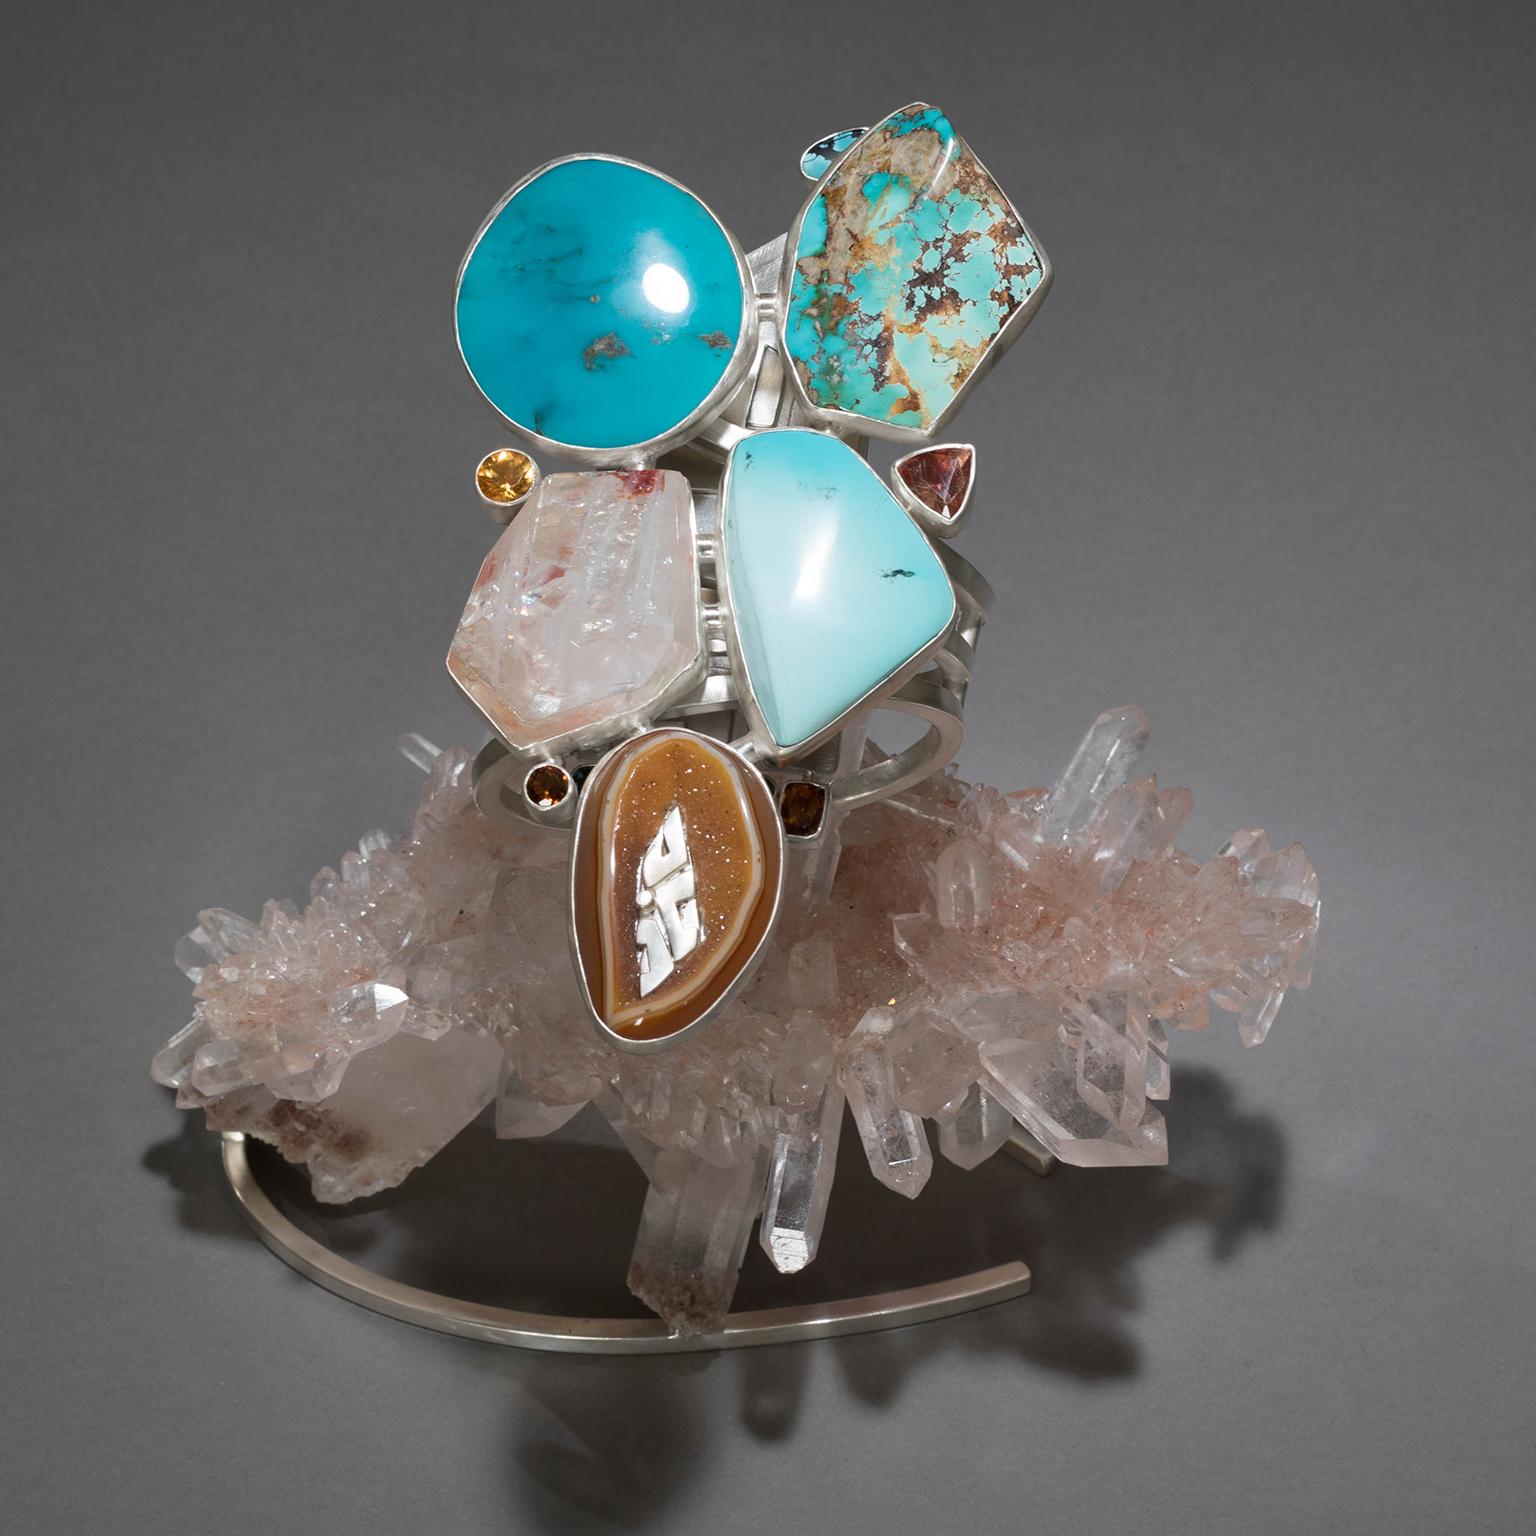 TURQUOISE BRACELET ON HIMALAYAN QUARTZ

Warriors in civilizations throughout history have relied on the power of turquoise for its strong defensive properties. In Studio Greytak’s Turquoise Bracelet on Himalayan Quartz, a trio of the guardian stones